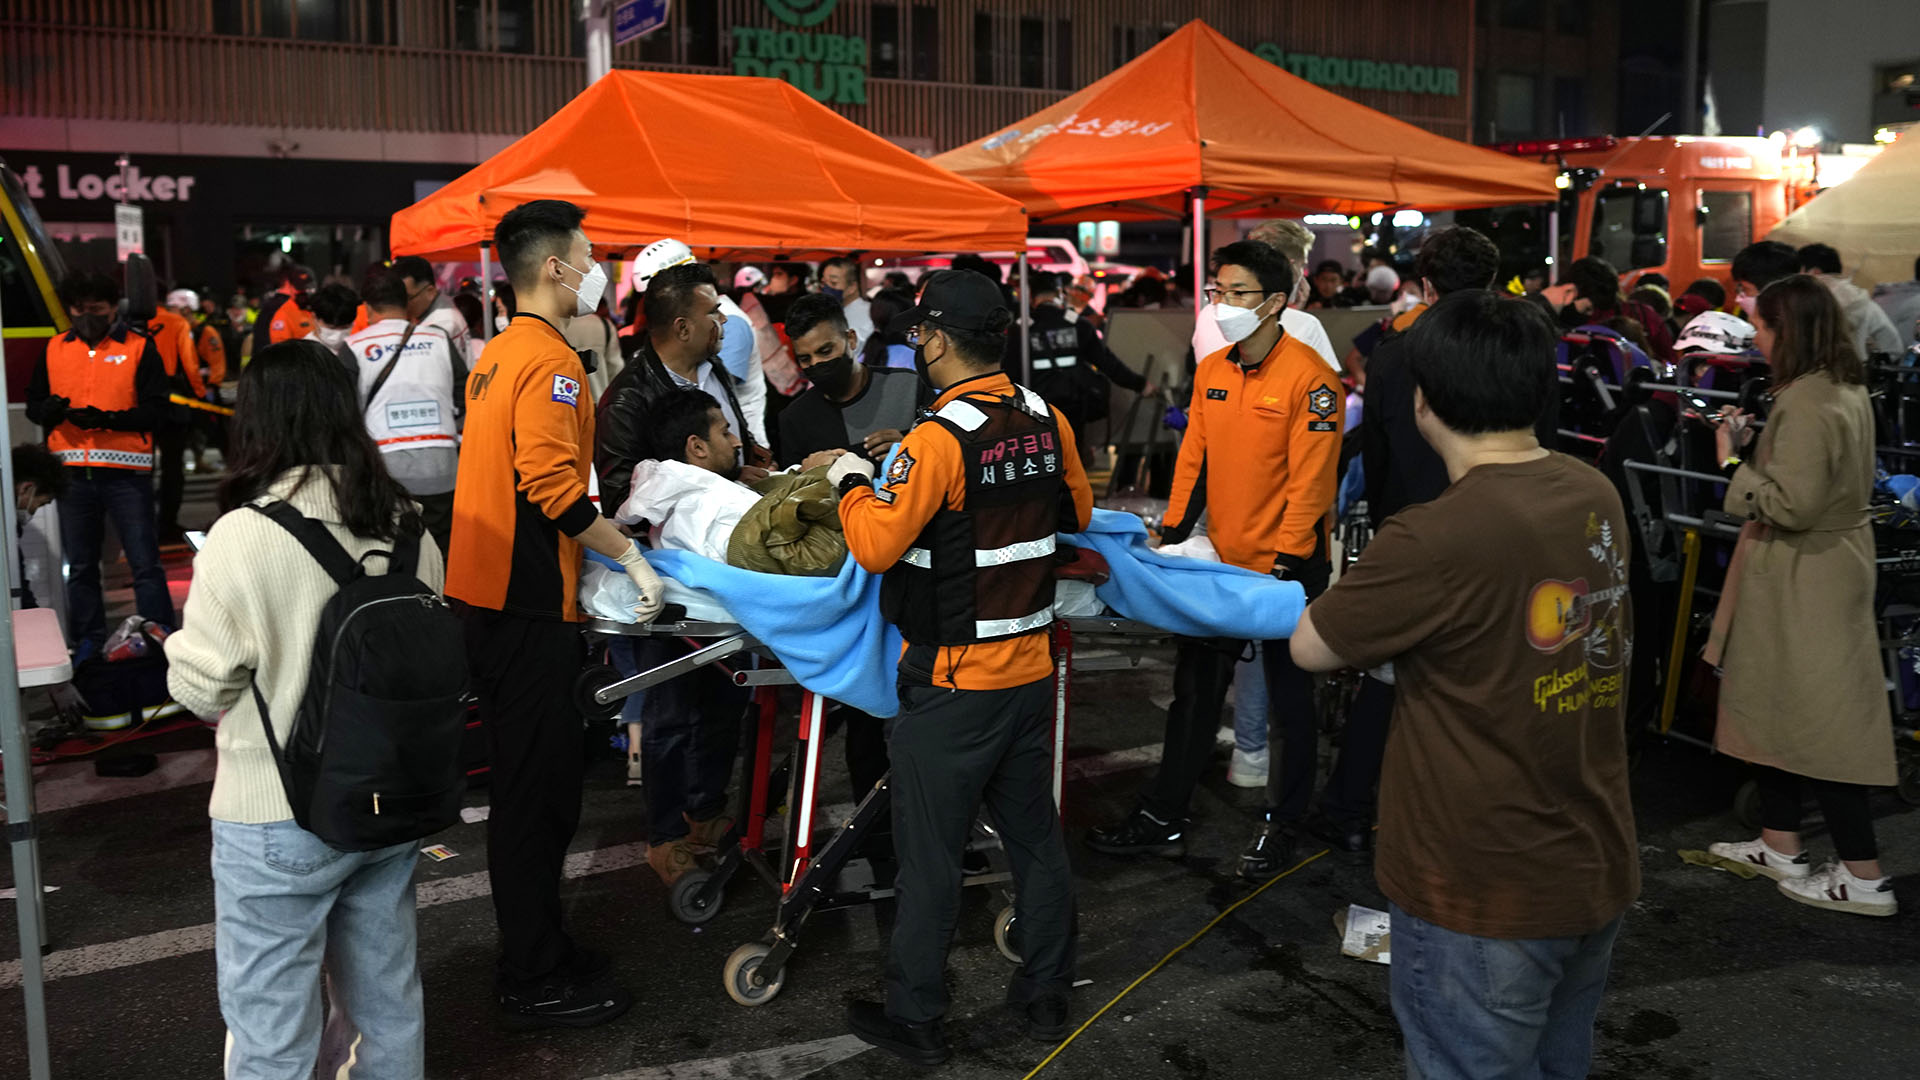 Rescue workers carry injured people at the street near the scene in Seoul, South Korea, early Sunday, Oct. 30, 2022. South Korean officials said around 50 people were in cardiac arrest and a number feared dead after being crushed by a large crowd pushing forward on a narrow street during Halloween festivities in the capital Seoul.  (AP Photo/Lee ​​Jin-man)